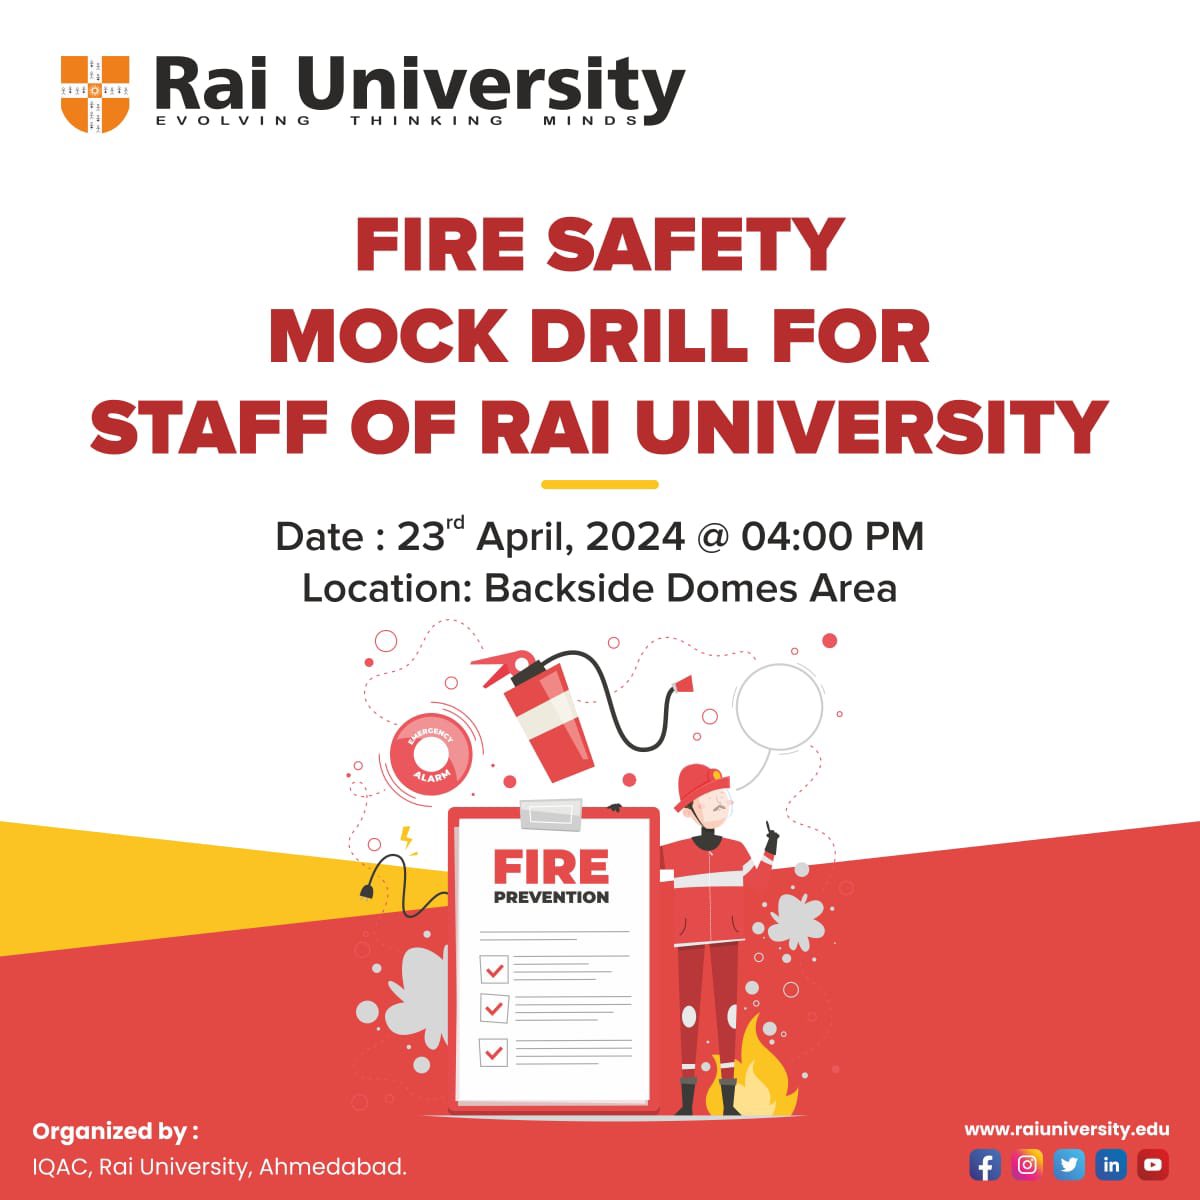 Join us for a crucial fire safety mock drill at Rai University! Protecting lives and ensuring preparedness. #FireSafety #RaiUniversity